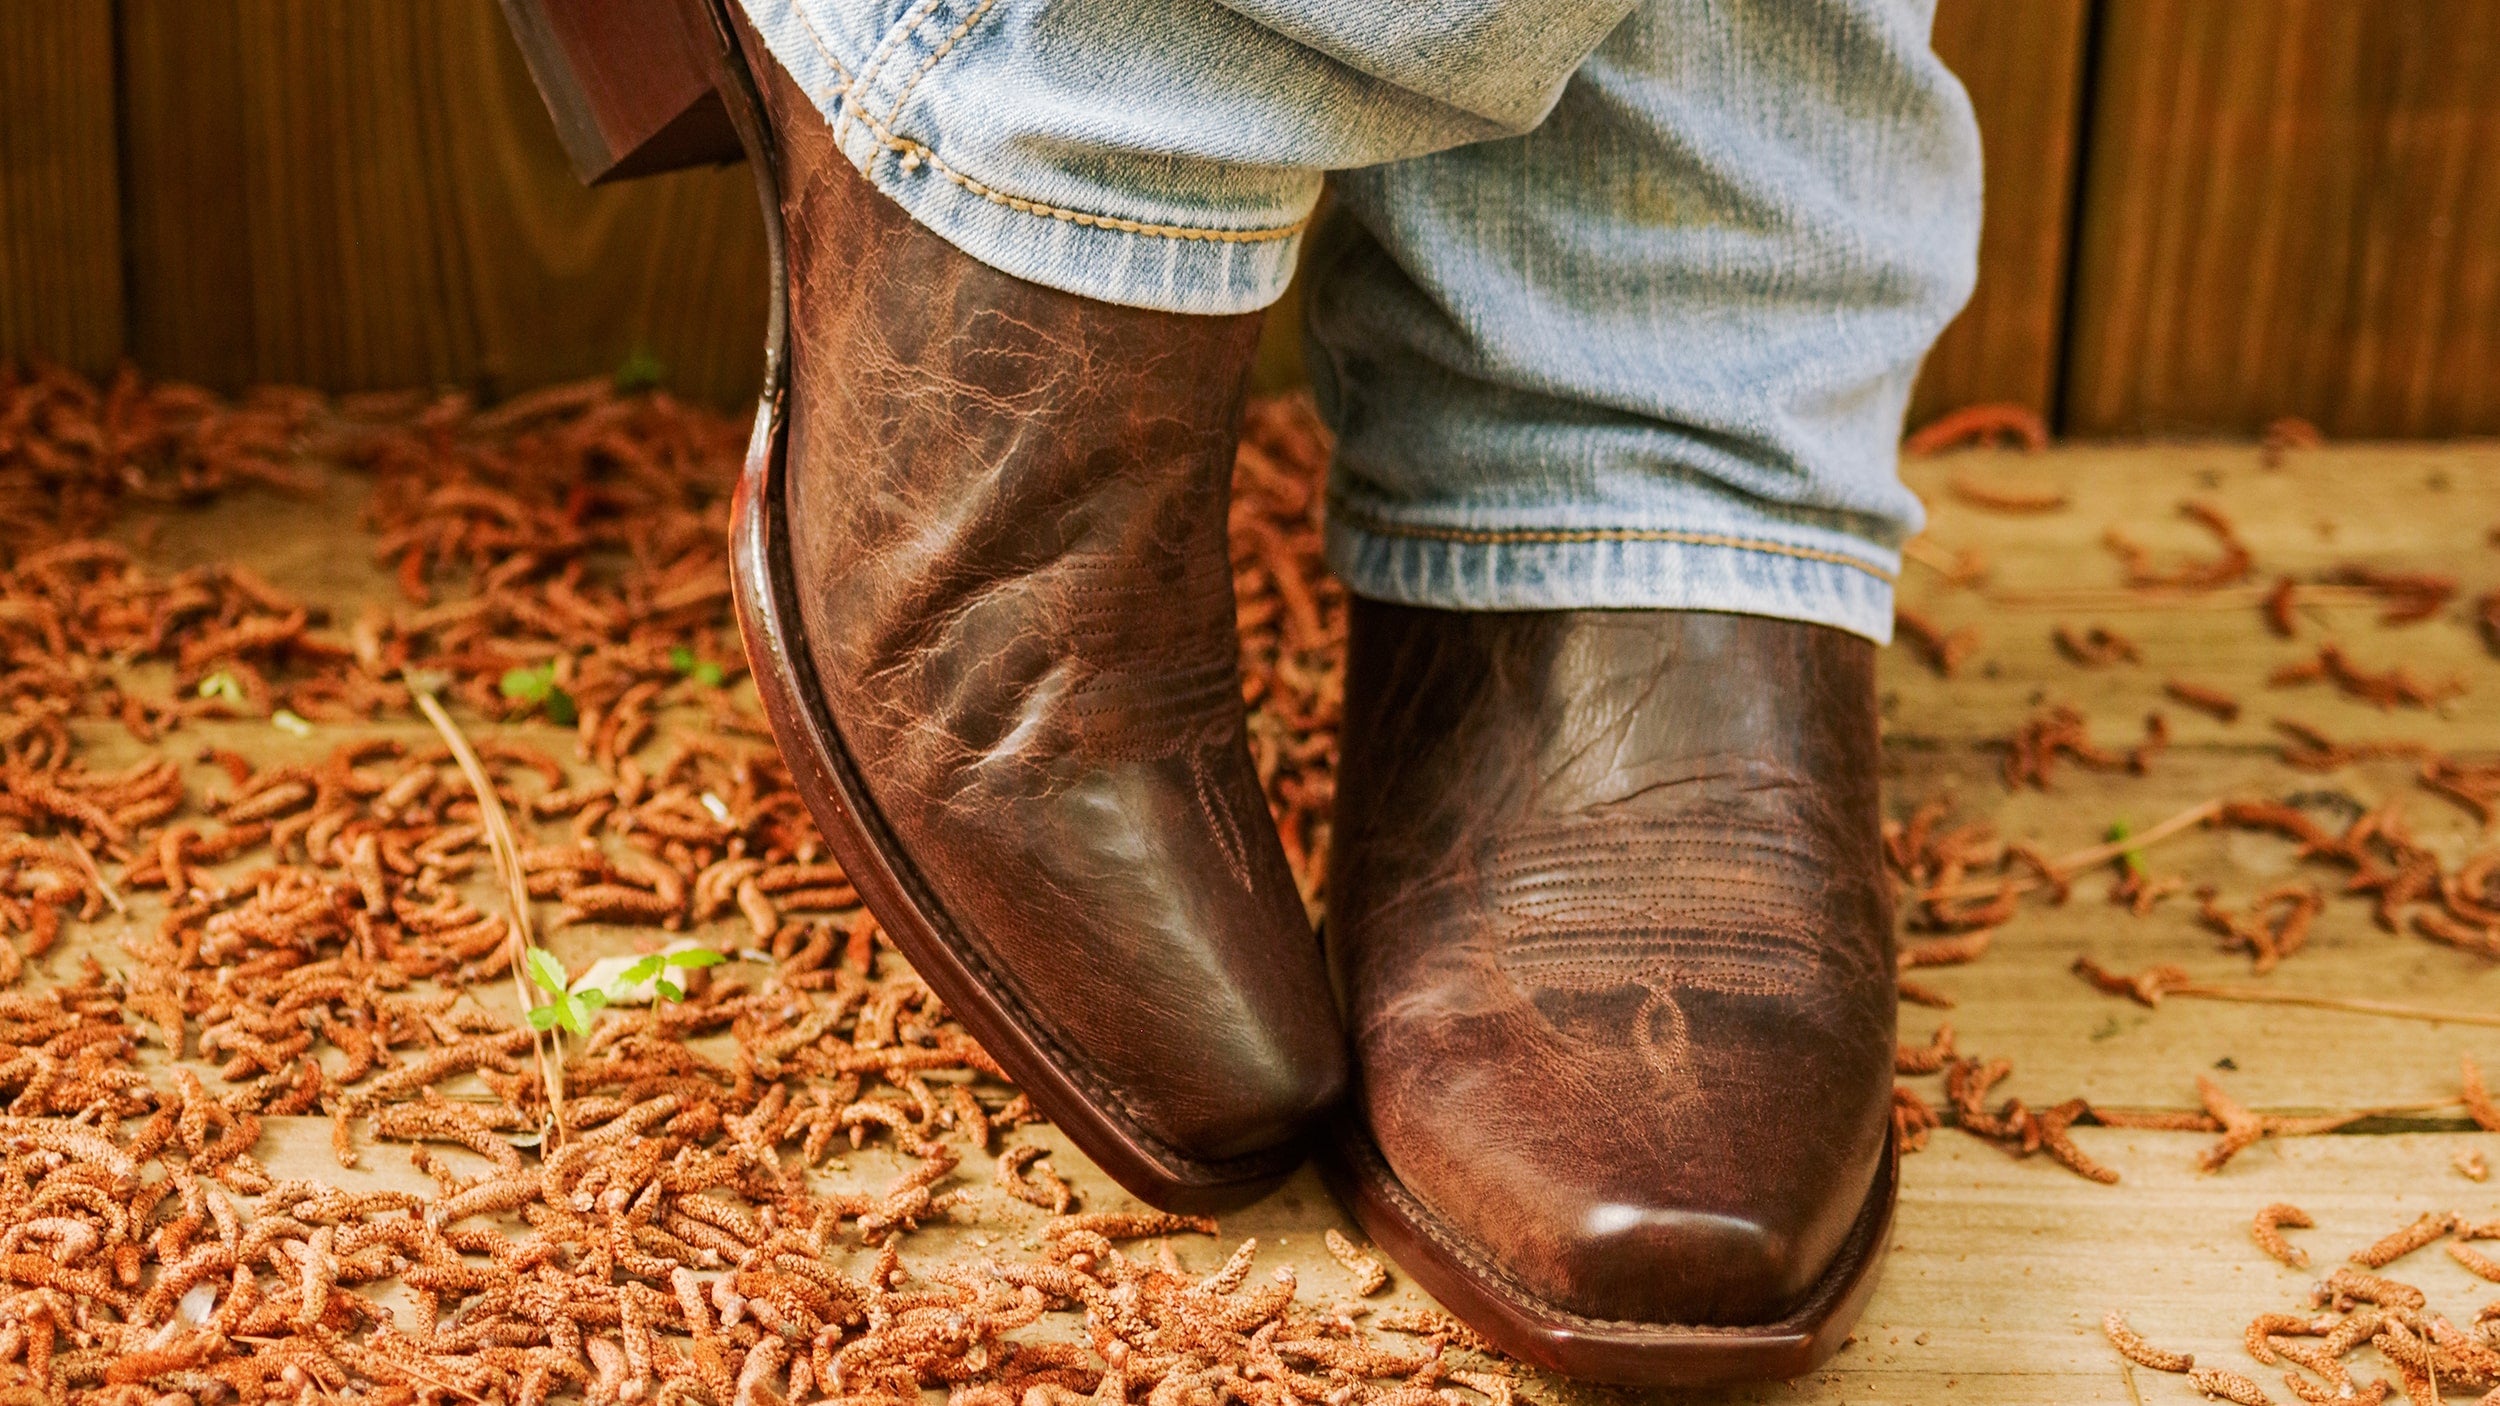 Man wearing RUJO 7-Toe Cowboy Boots standing with legs crossed